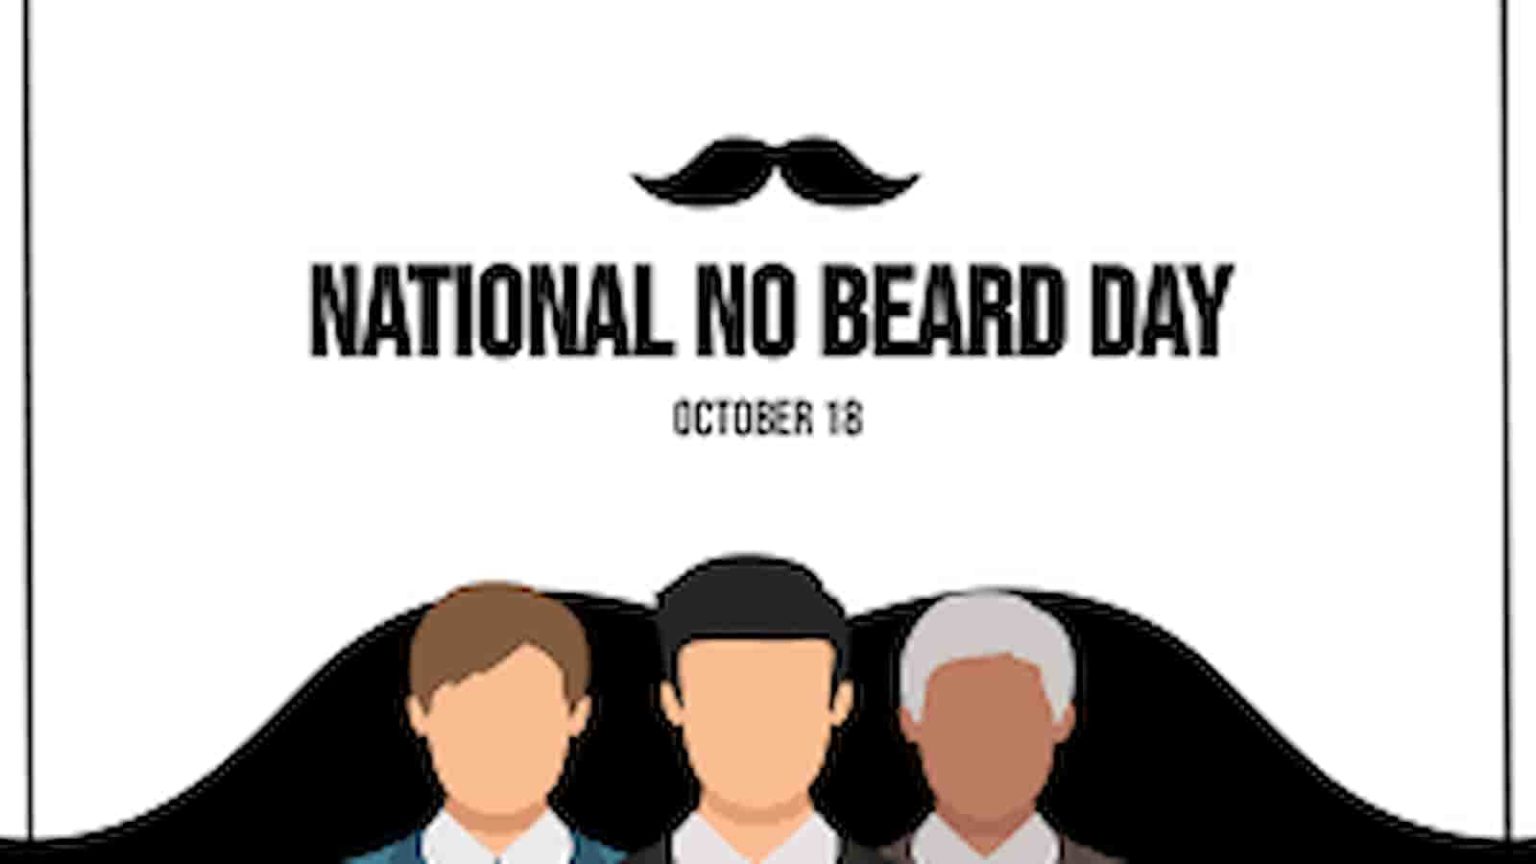 National No Beard Day Quotes, Wishes And Messages